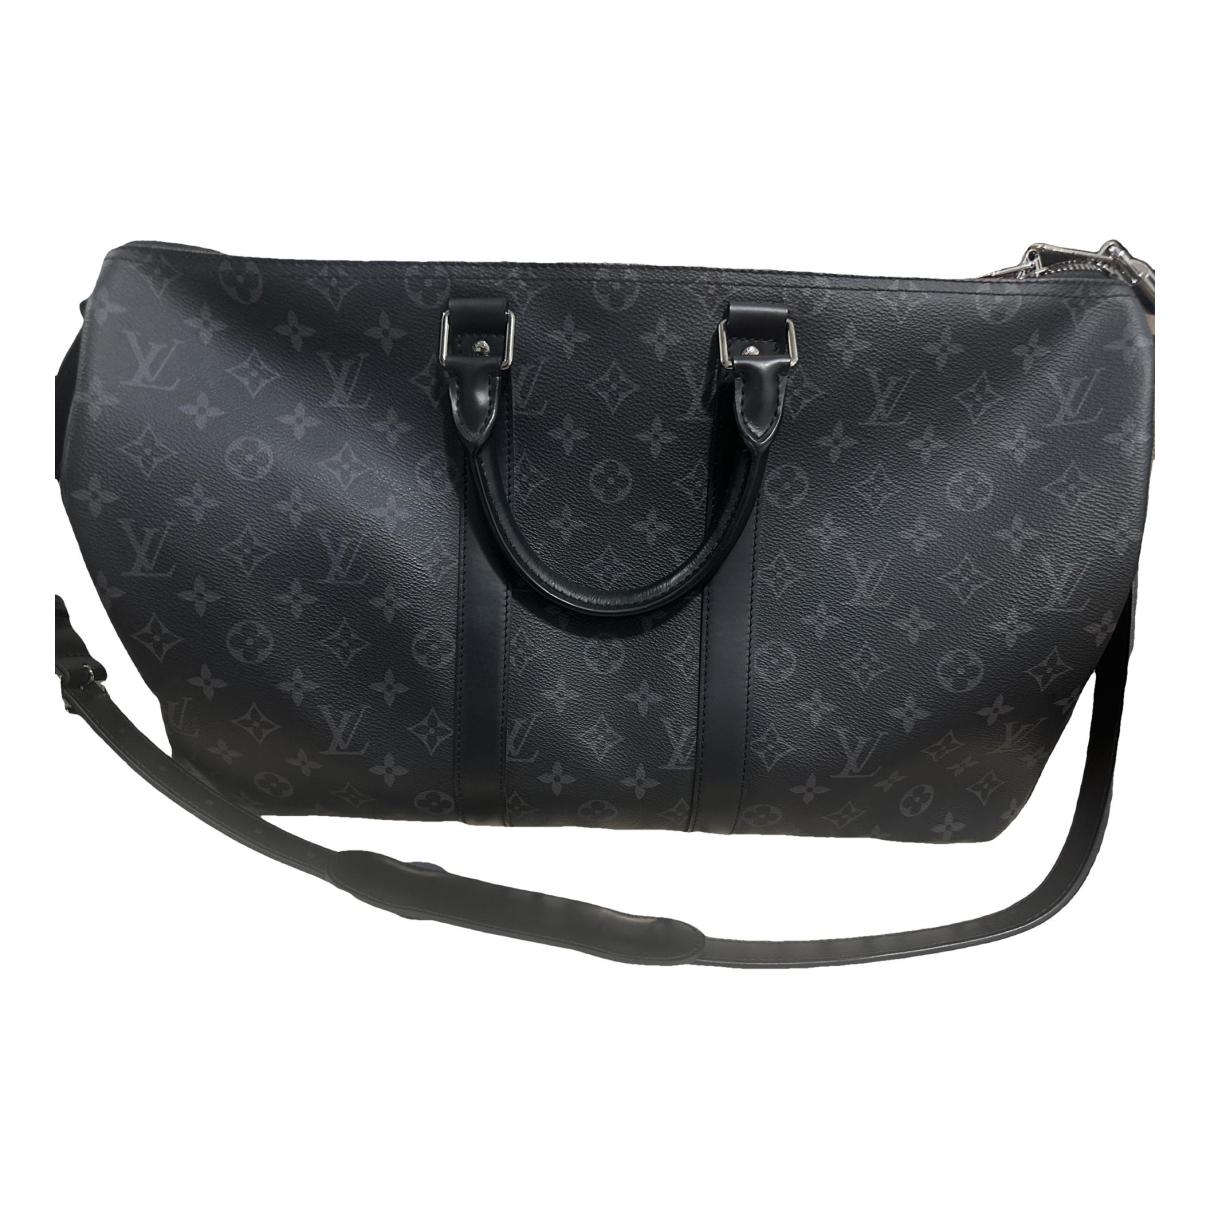 Keepall leather weekend bag Louis Vuitton Black in Leather - 29894106